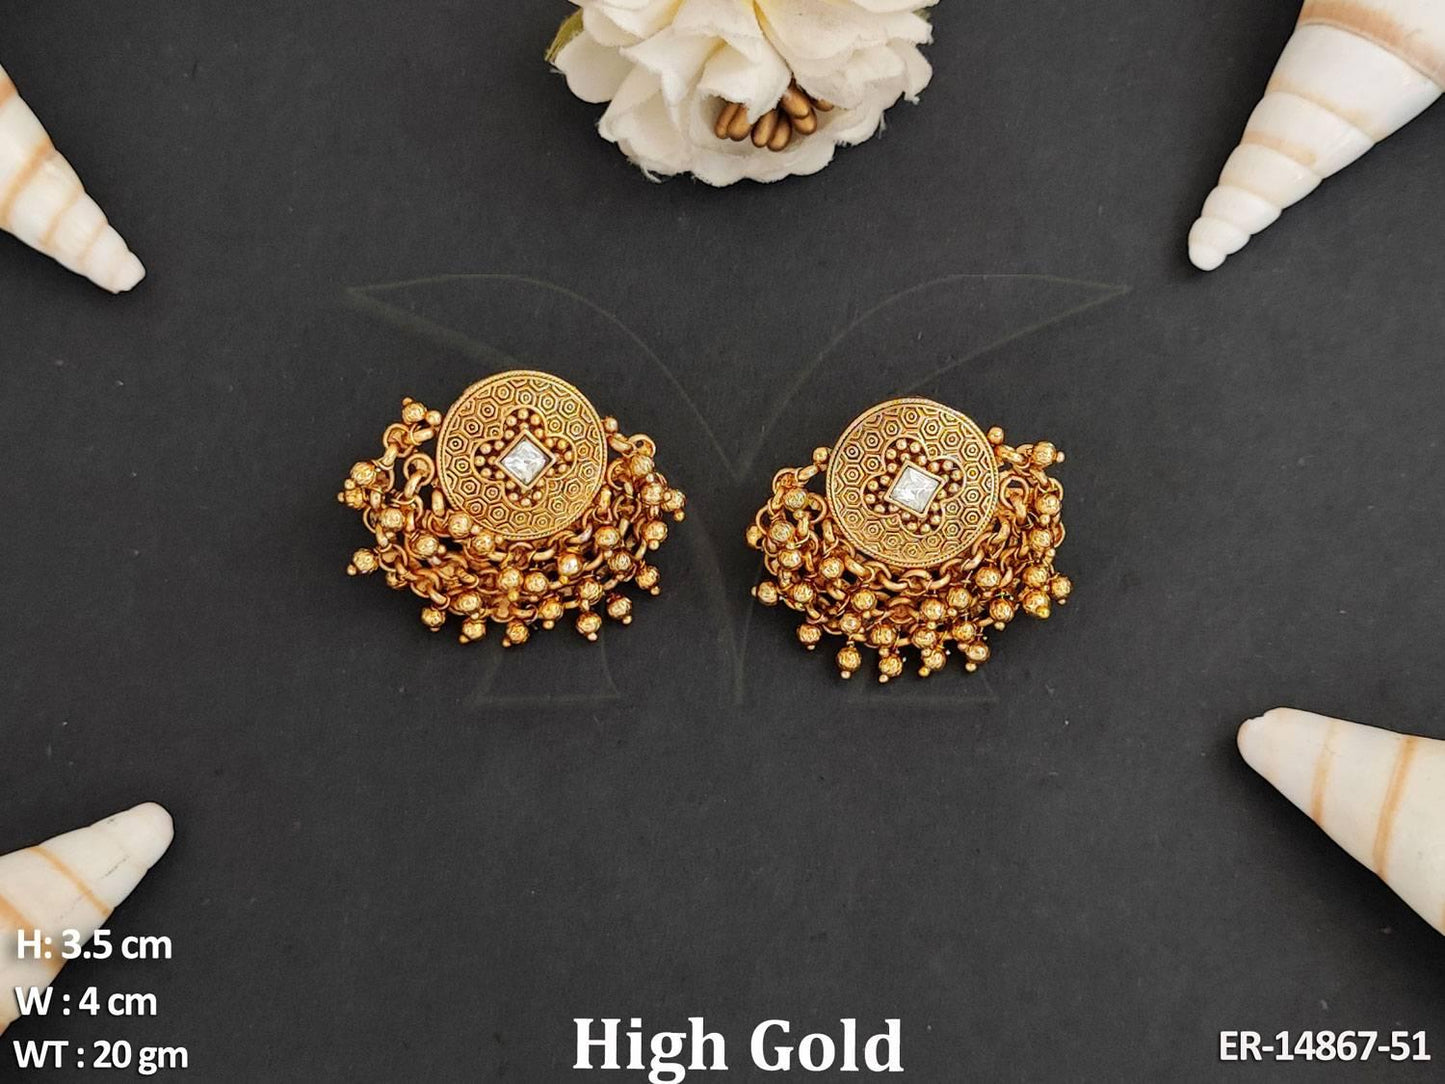 Elevate your style with our Antique Jewellery designer earrings. Made from brass or copper metal,